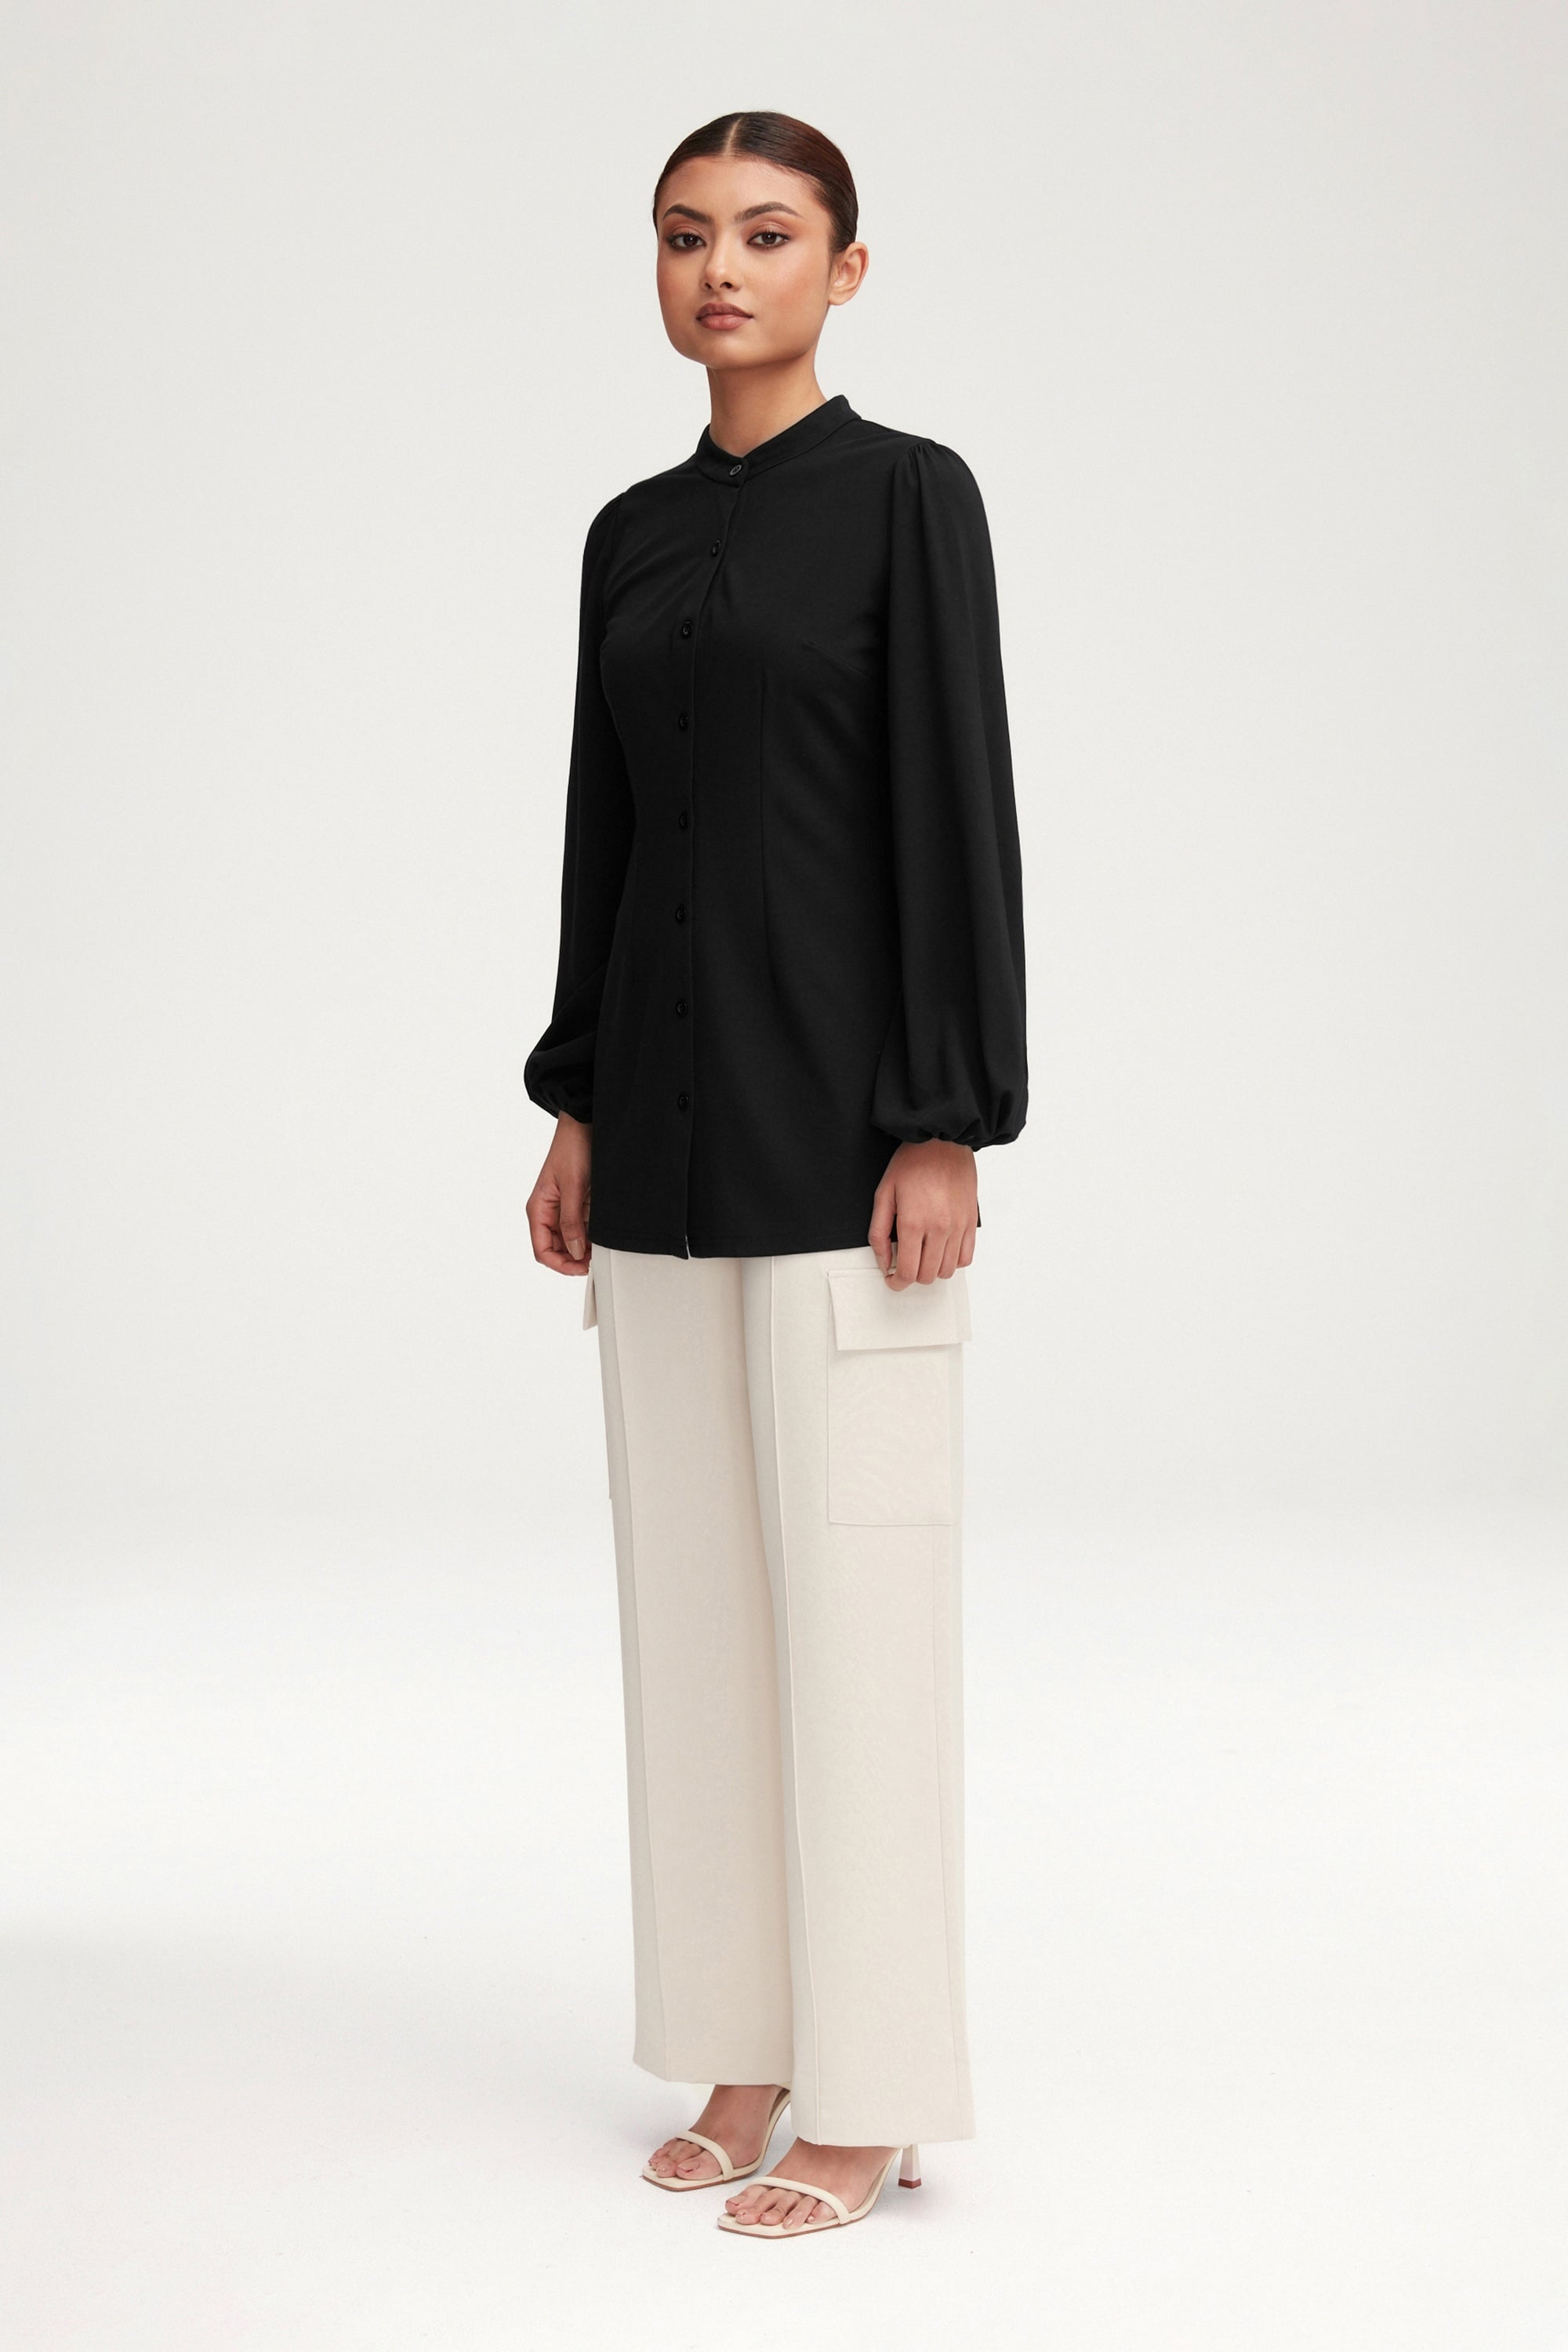 Rayana Jersey Button Down Top - Black Clothing Veiled 